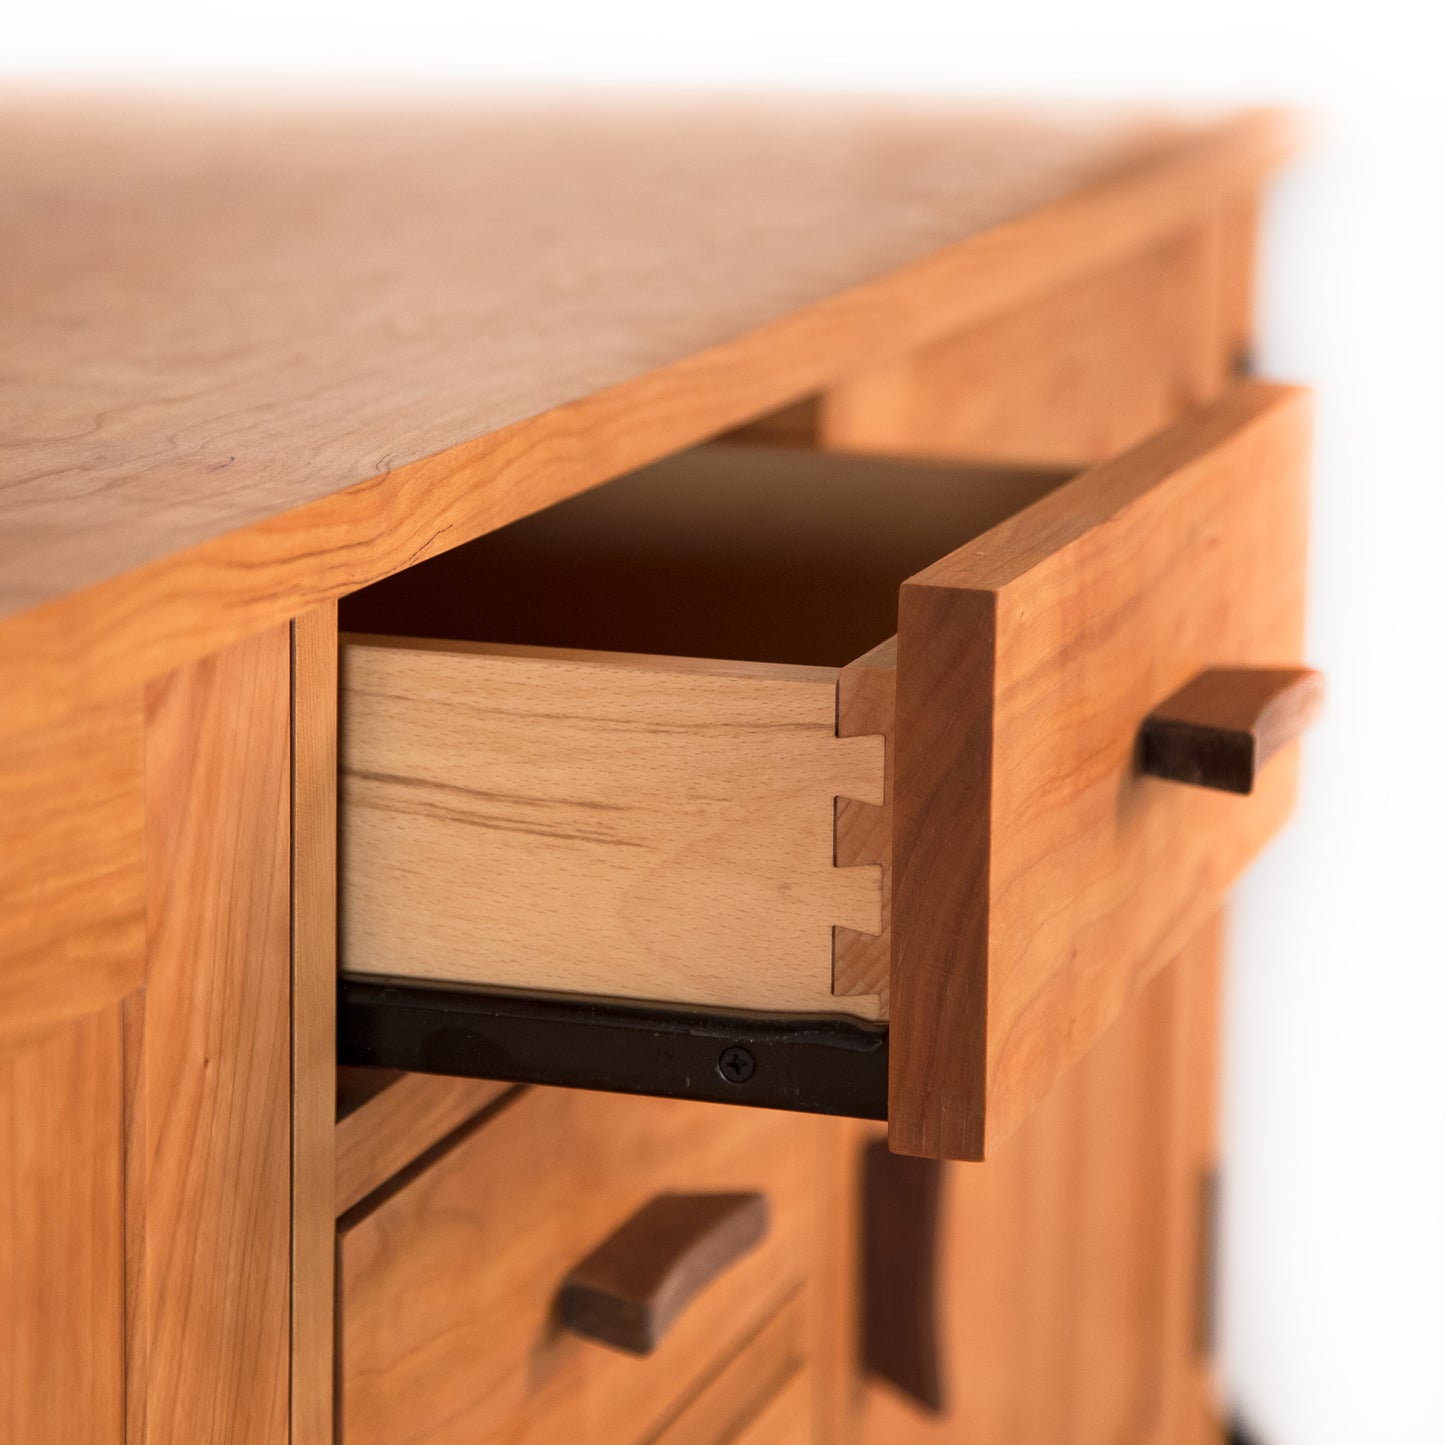 A close up of a drawer in a wooden cabinet, showcasing the impeccable craftsmanship of the Contemporary Craftsman Huntboard by Vermont Furniture Designs.